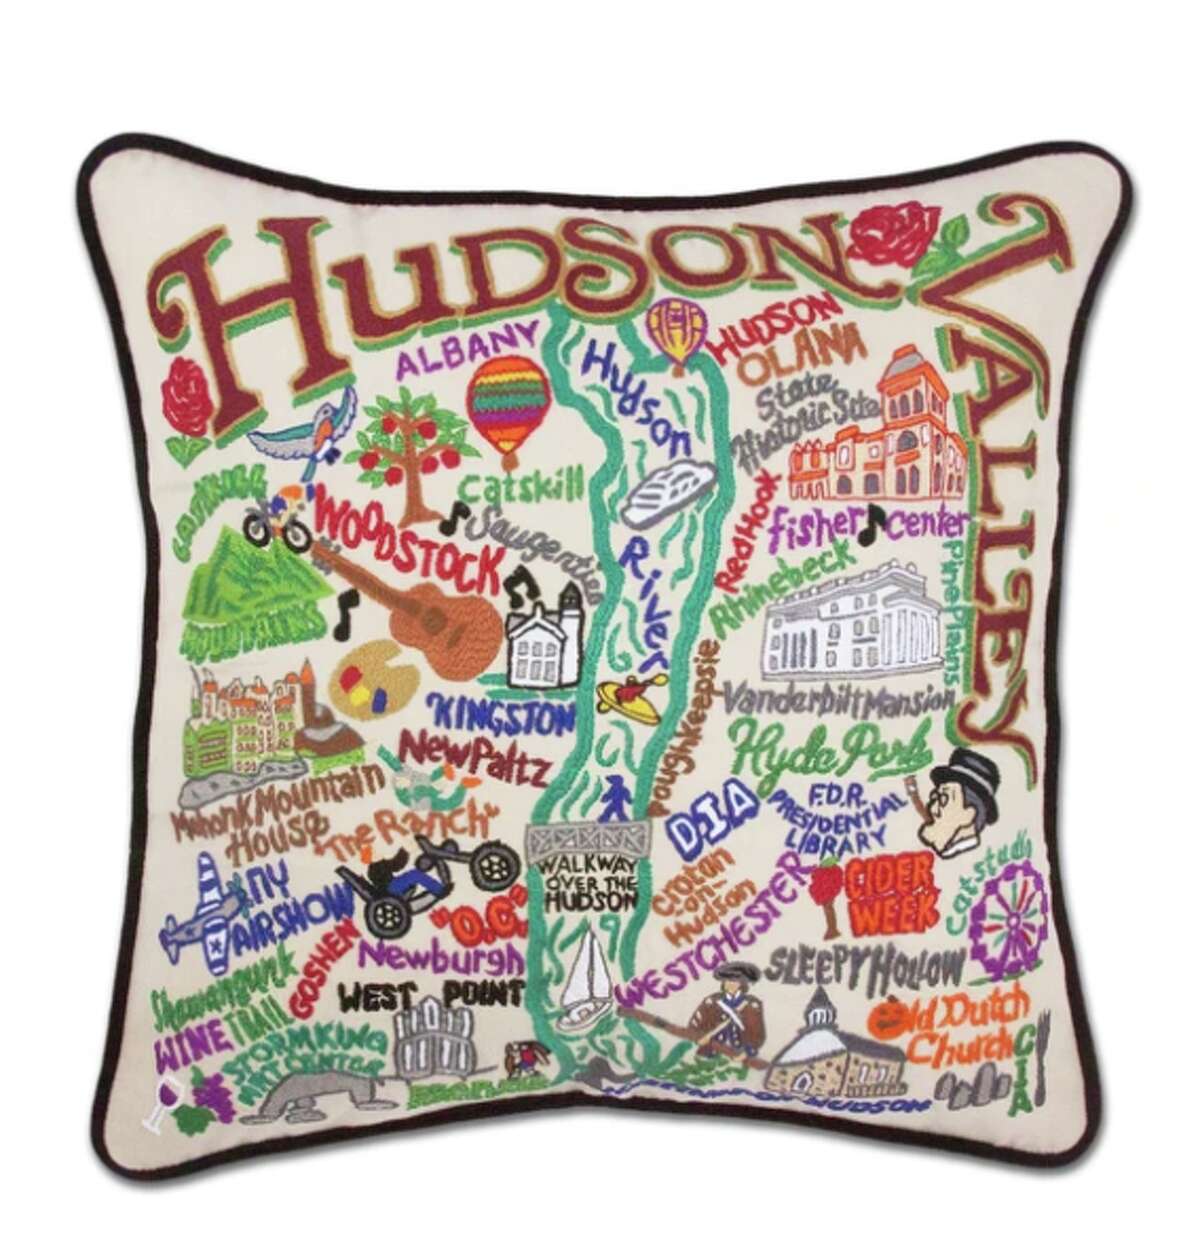 From the Shawangunk wine trail and Cider Week, to Vanderbilt Mansion and Olana, this hand-embroidered pillow made by creative team catstudio captures colorful Hudson Valley in its full range and vibrancy ($225).